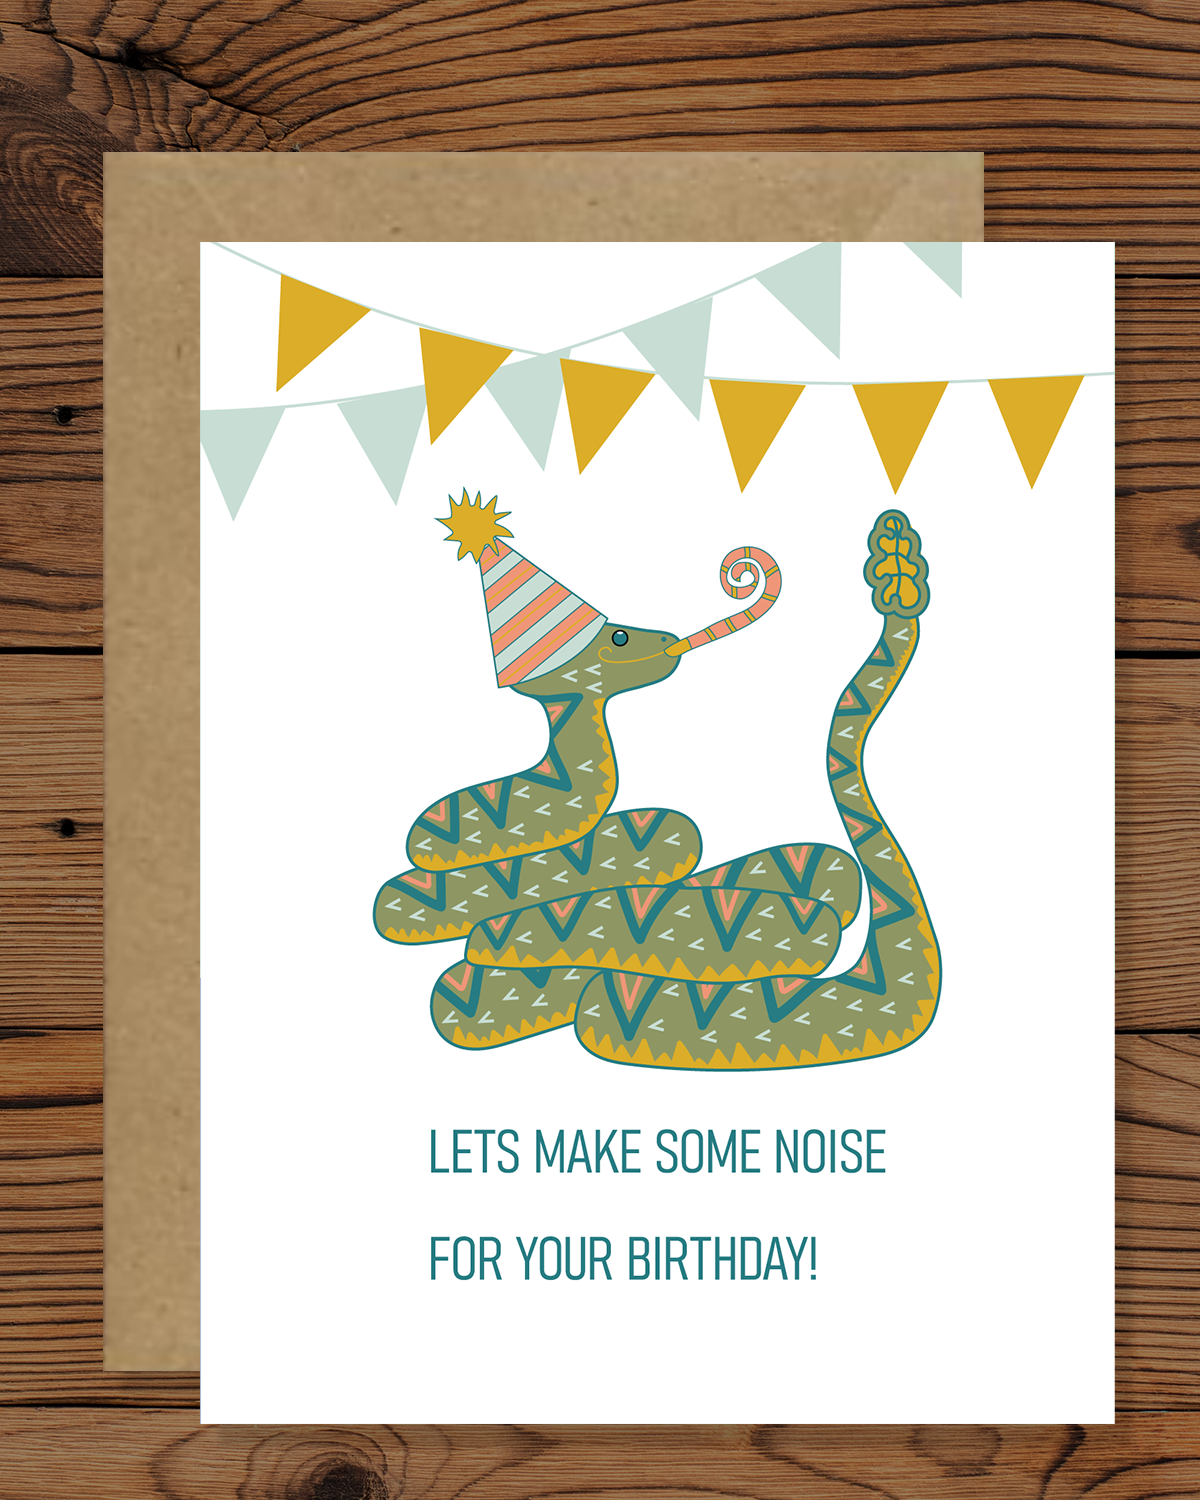 Let's Make Some Noise for your Birthday!